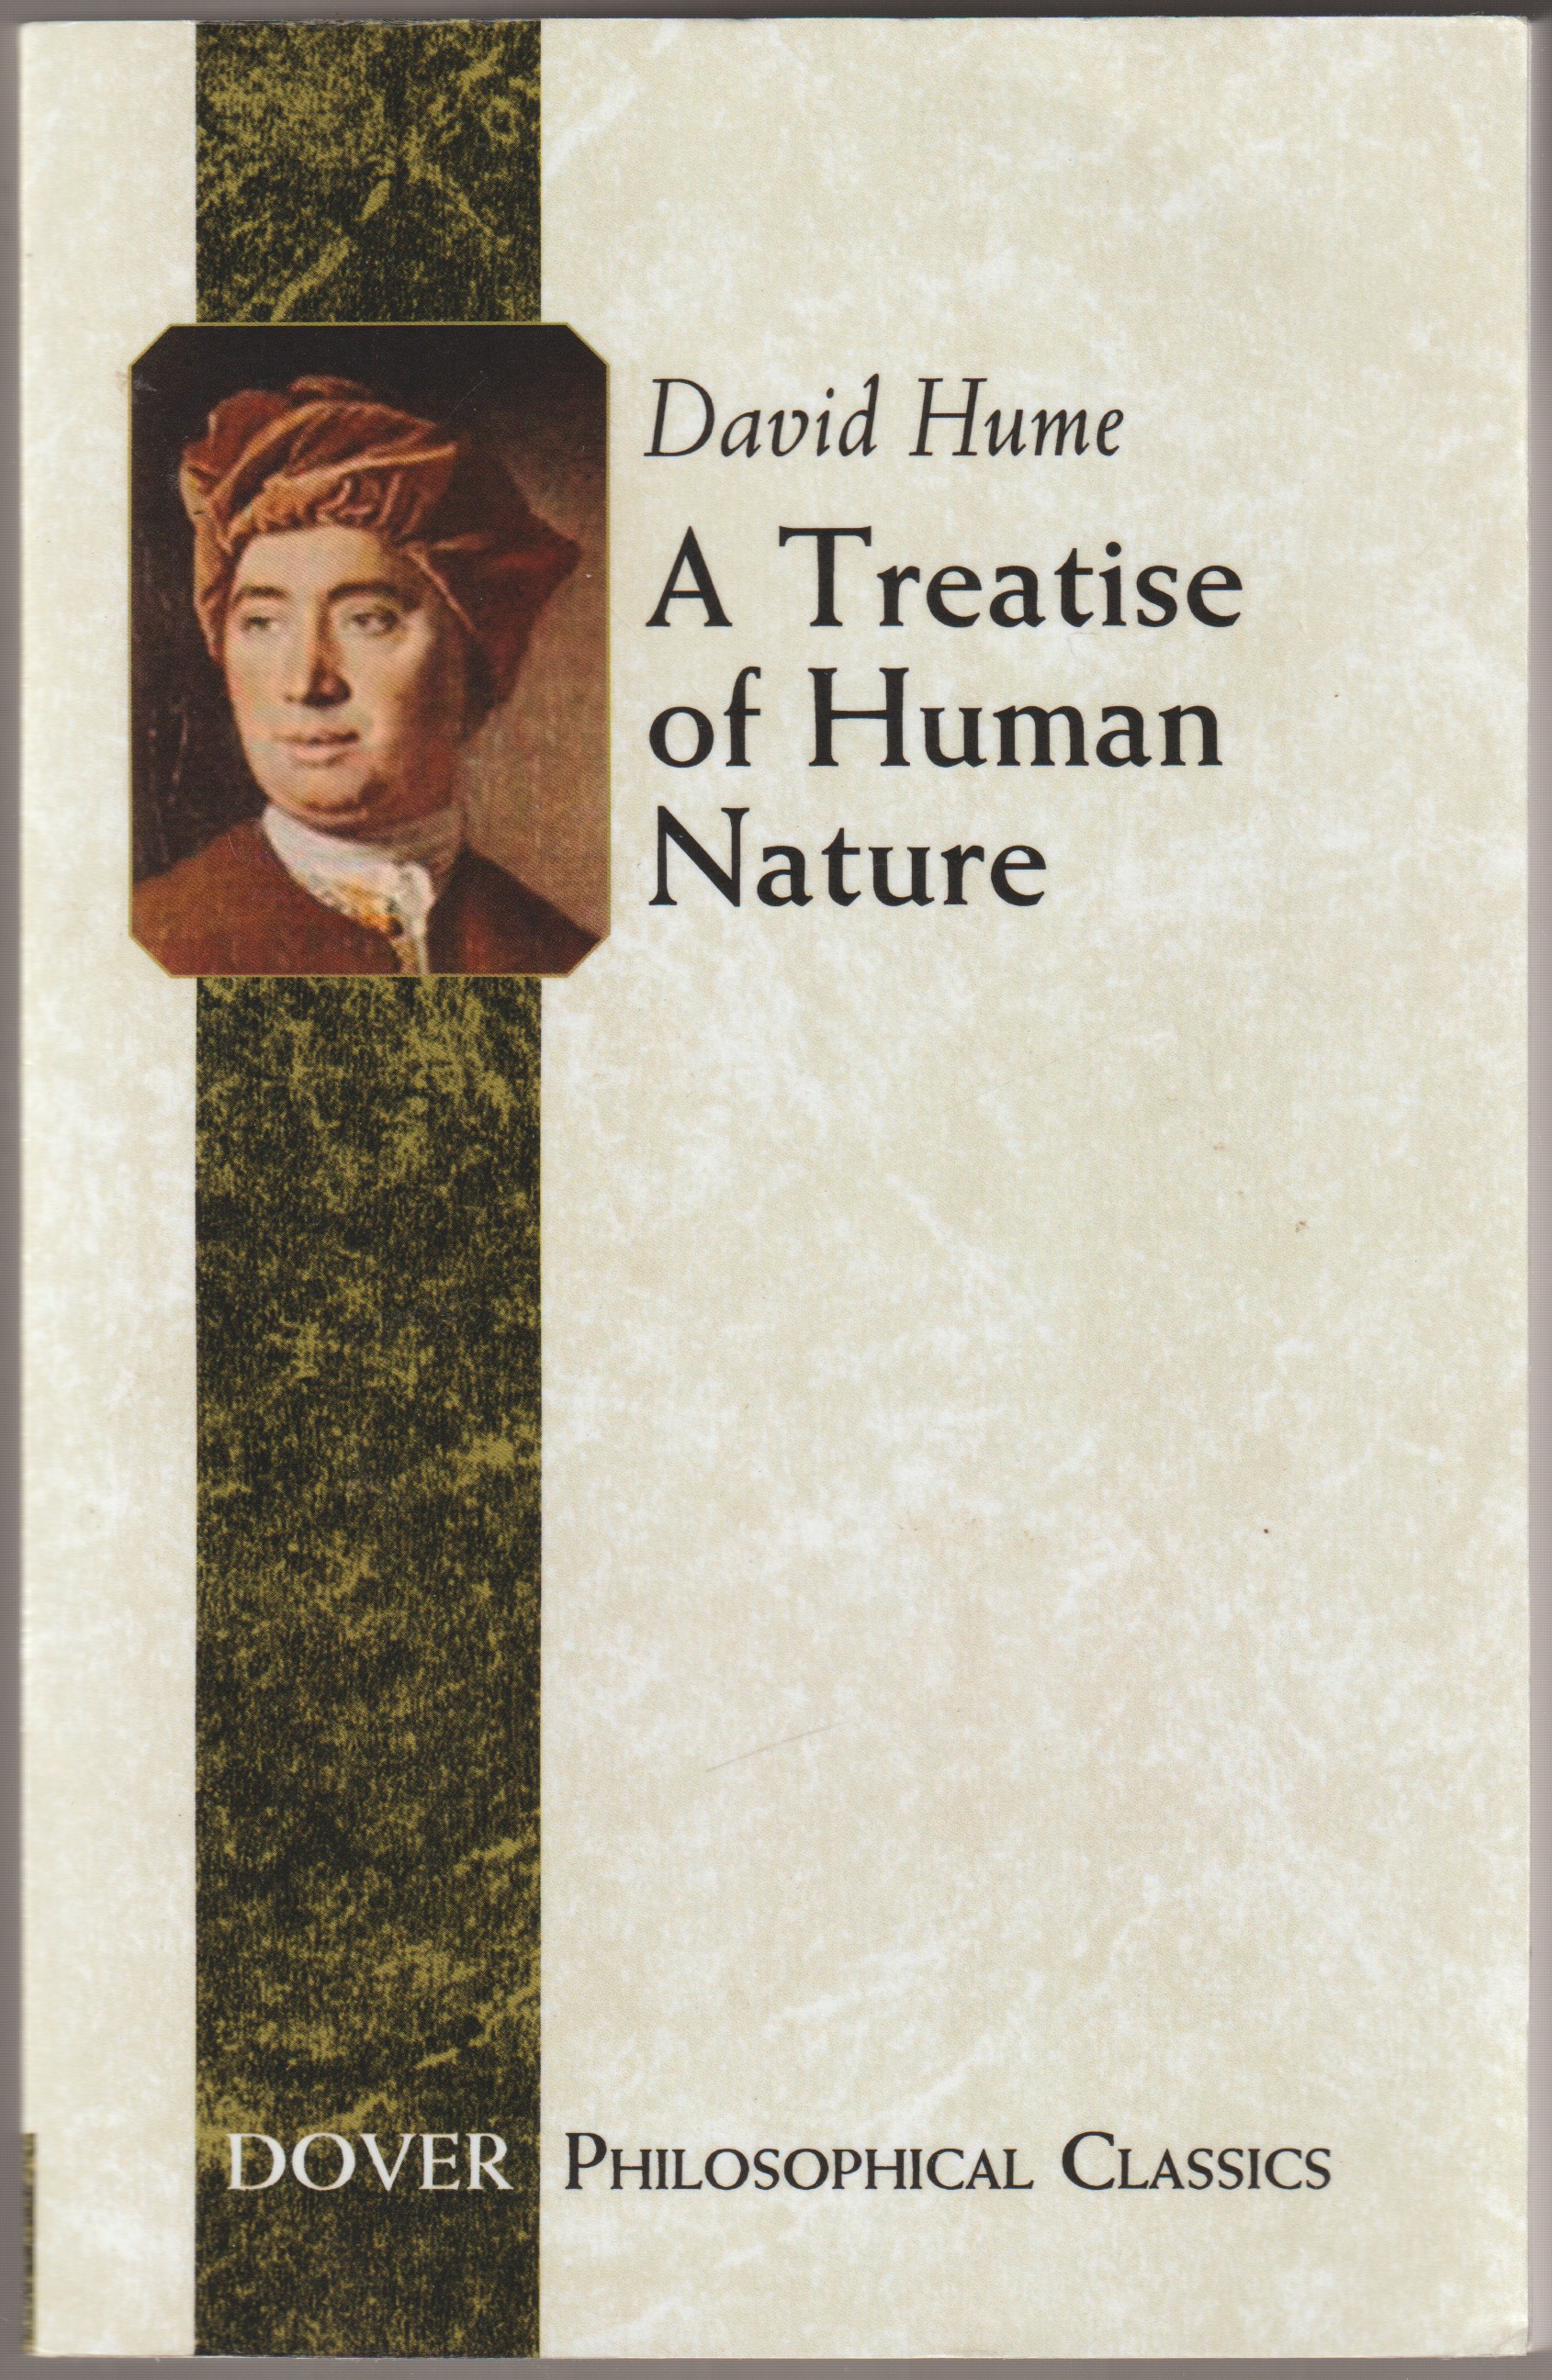 A treatise of human nature.